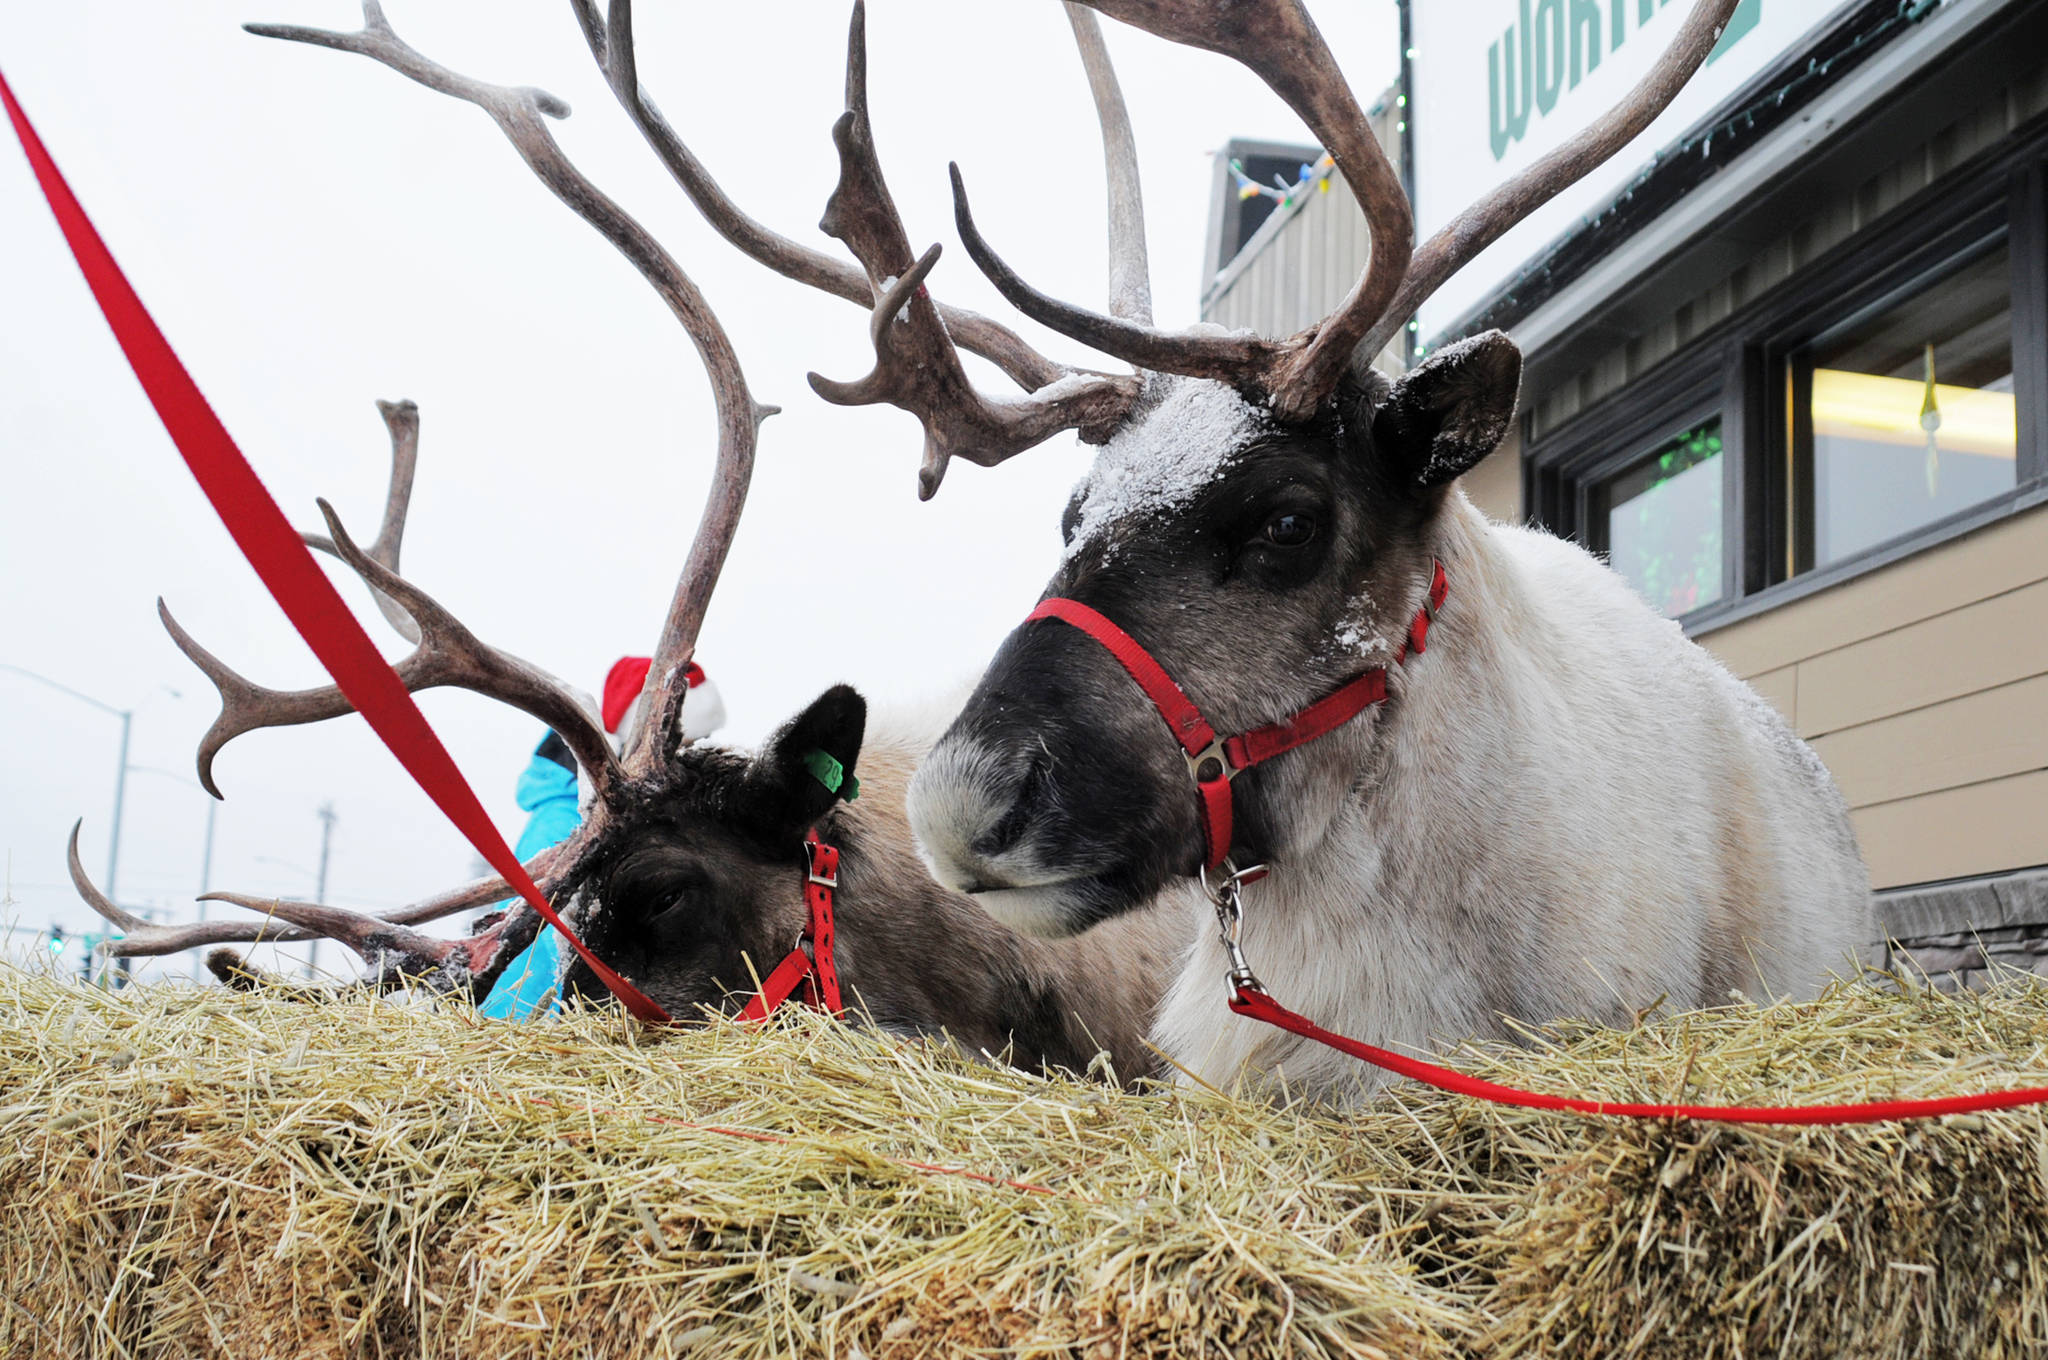 Comet (right) and Crash (left), reindeer owned and raised by Jenna Hansen of Nikiski, posed for pictures with people who dropped by Trustworthy Hardware 2 on Wednesday, Dec. 20, 2016 in Soldotna, Alaska.  (Elizabeth Earl/Peninsula Clarion, file)